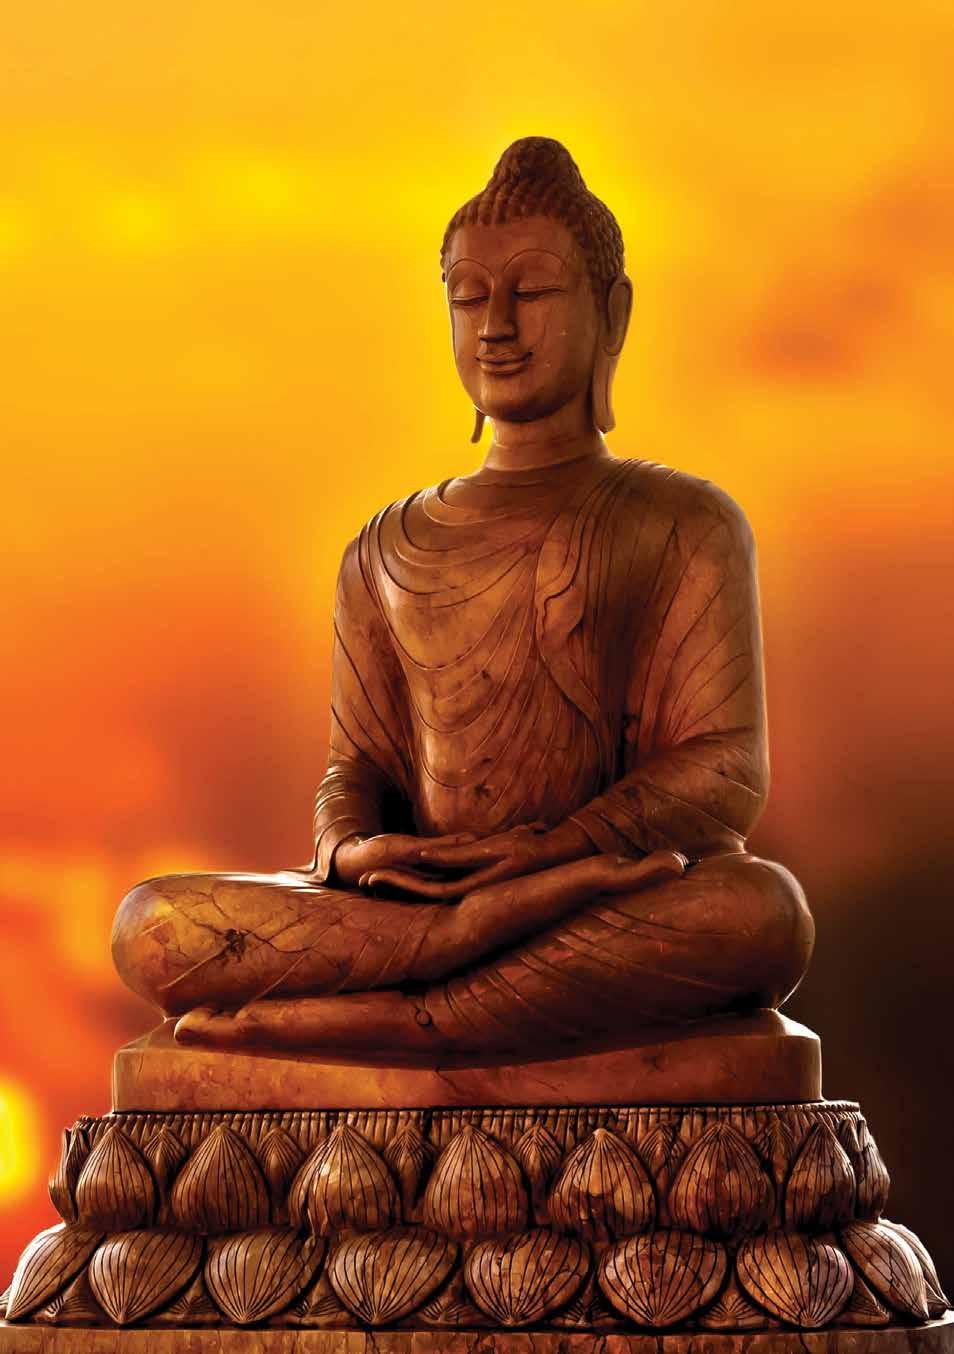 Cover Story BUDDHA A Source of Wisdom to World Vedika Sharma Thousands of candles can be lighted from a single candle, and the life